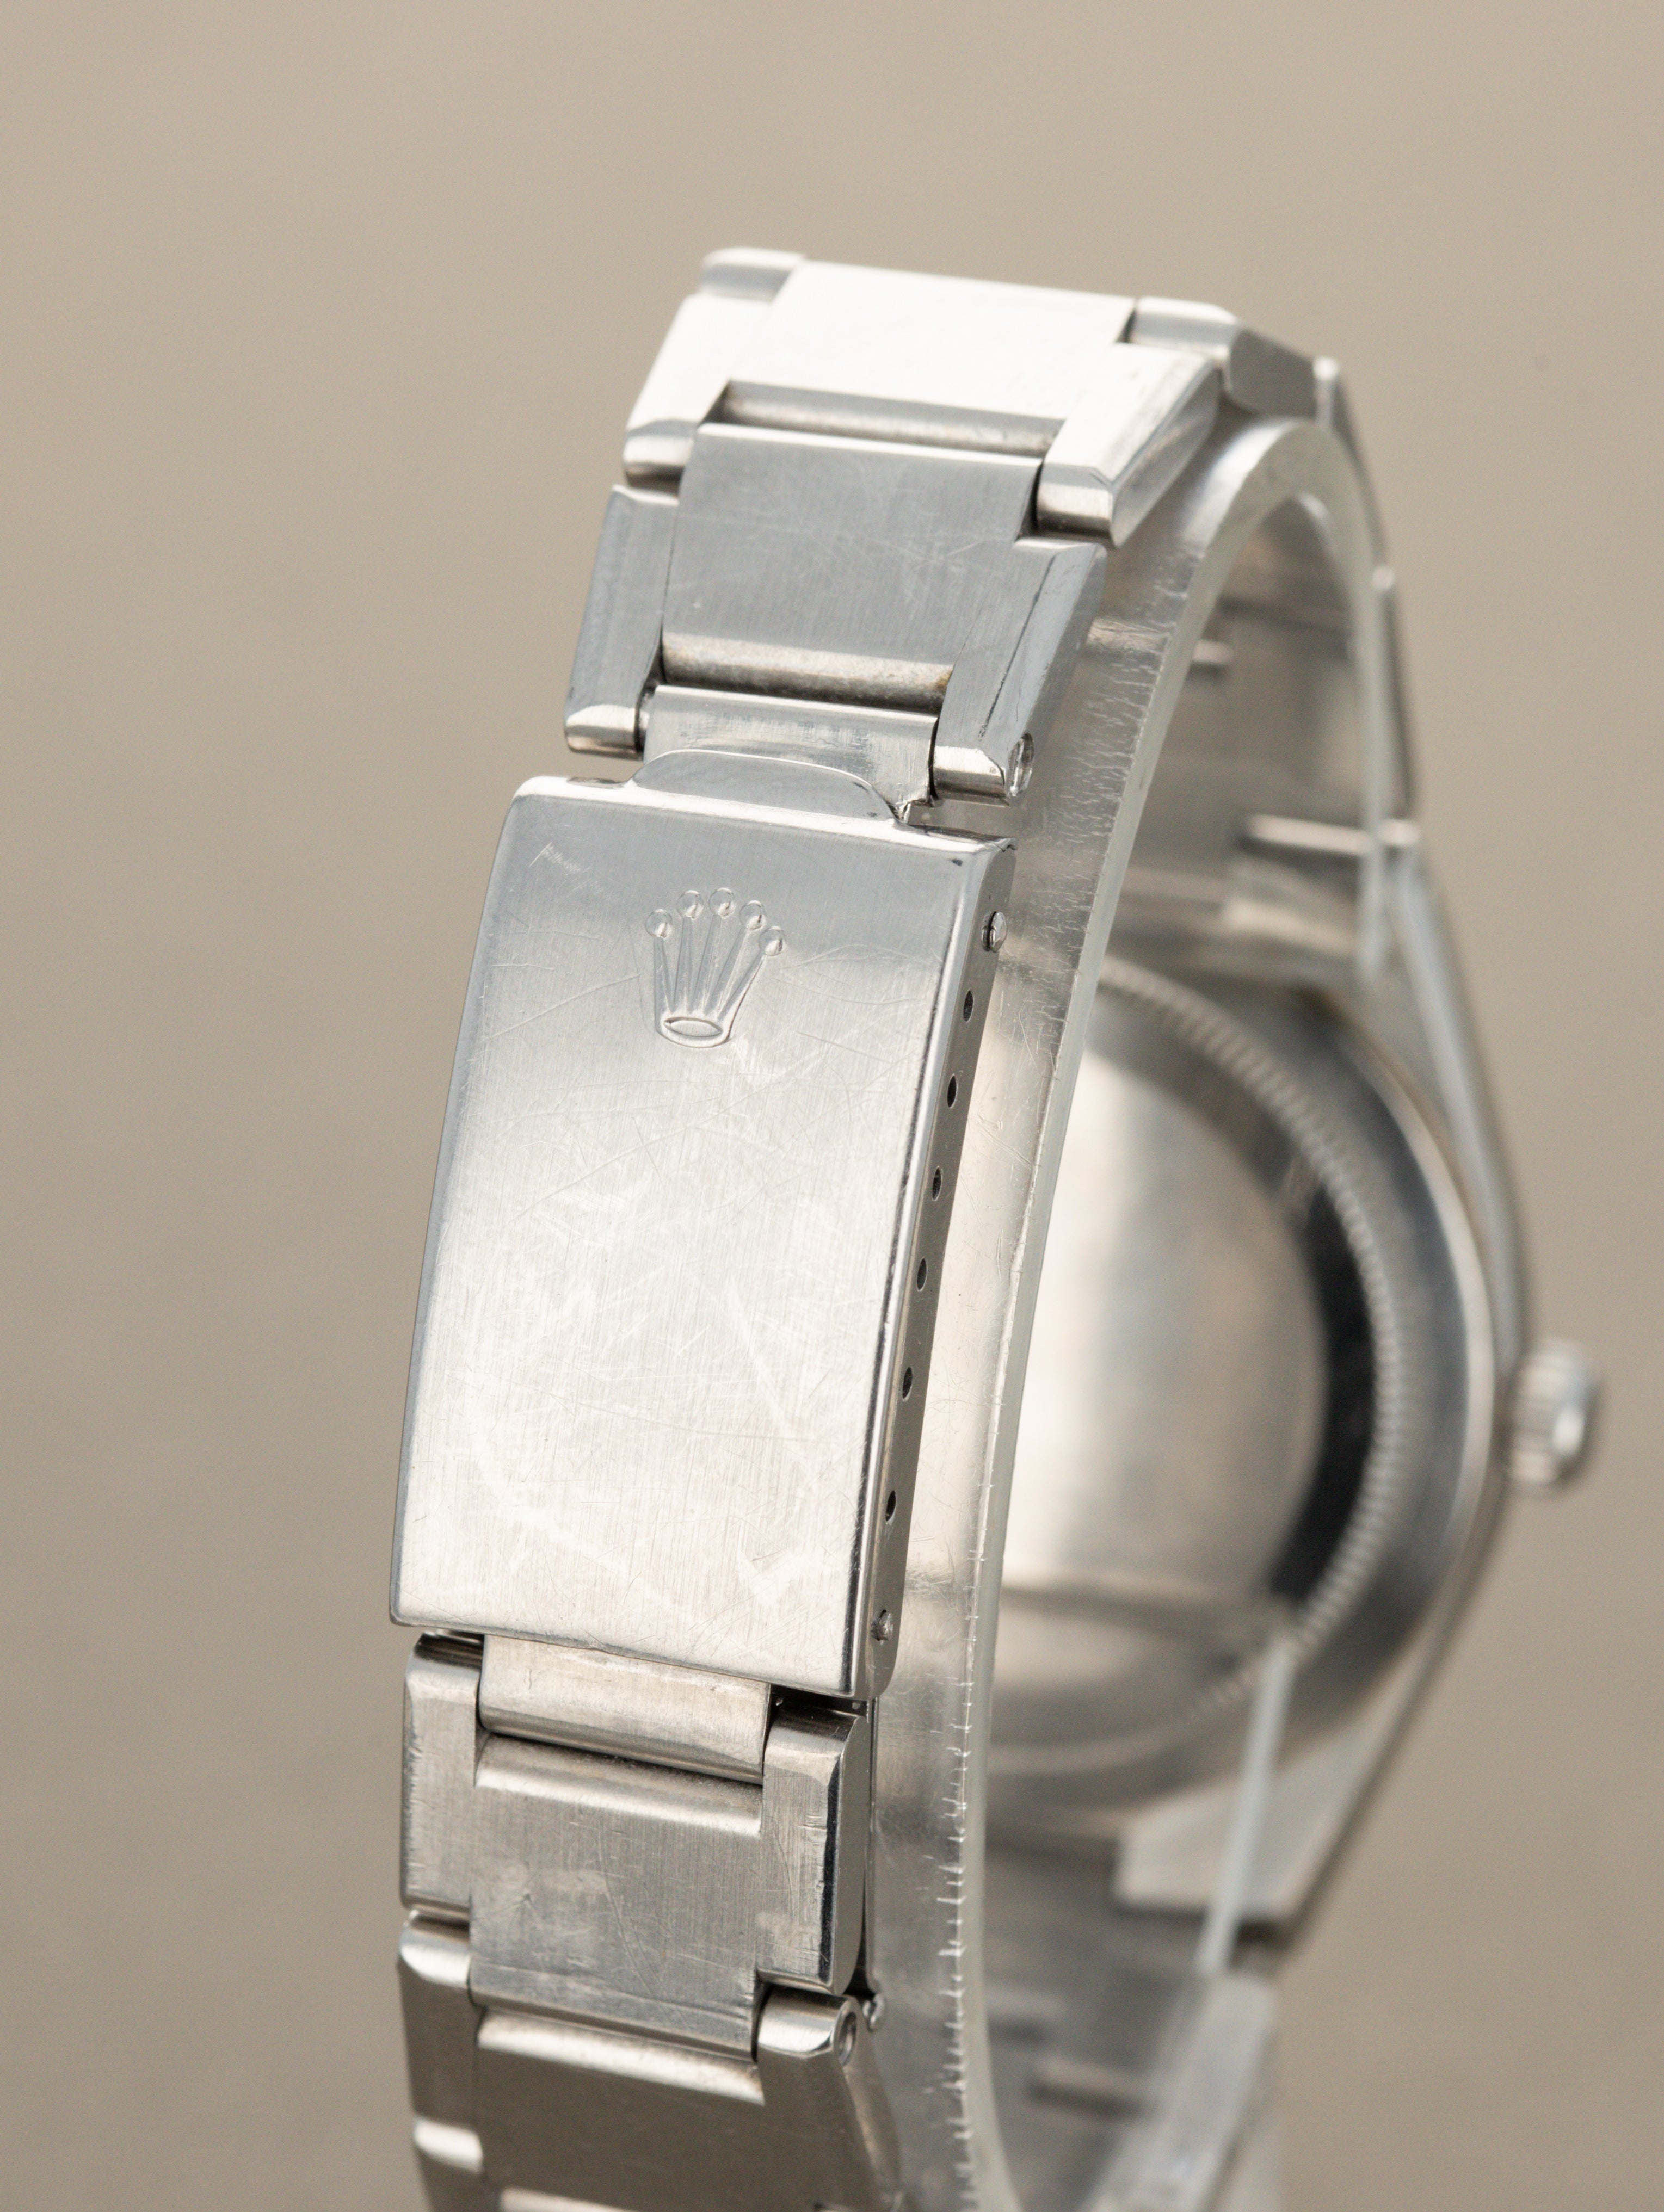 Rolex Oyster Perpetual Date Ref. 1530 - Unpolished